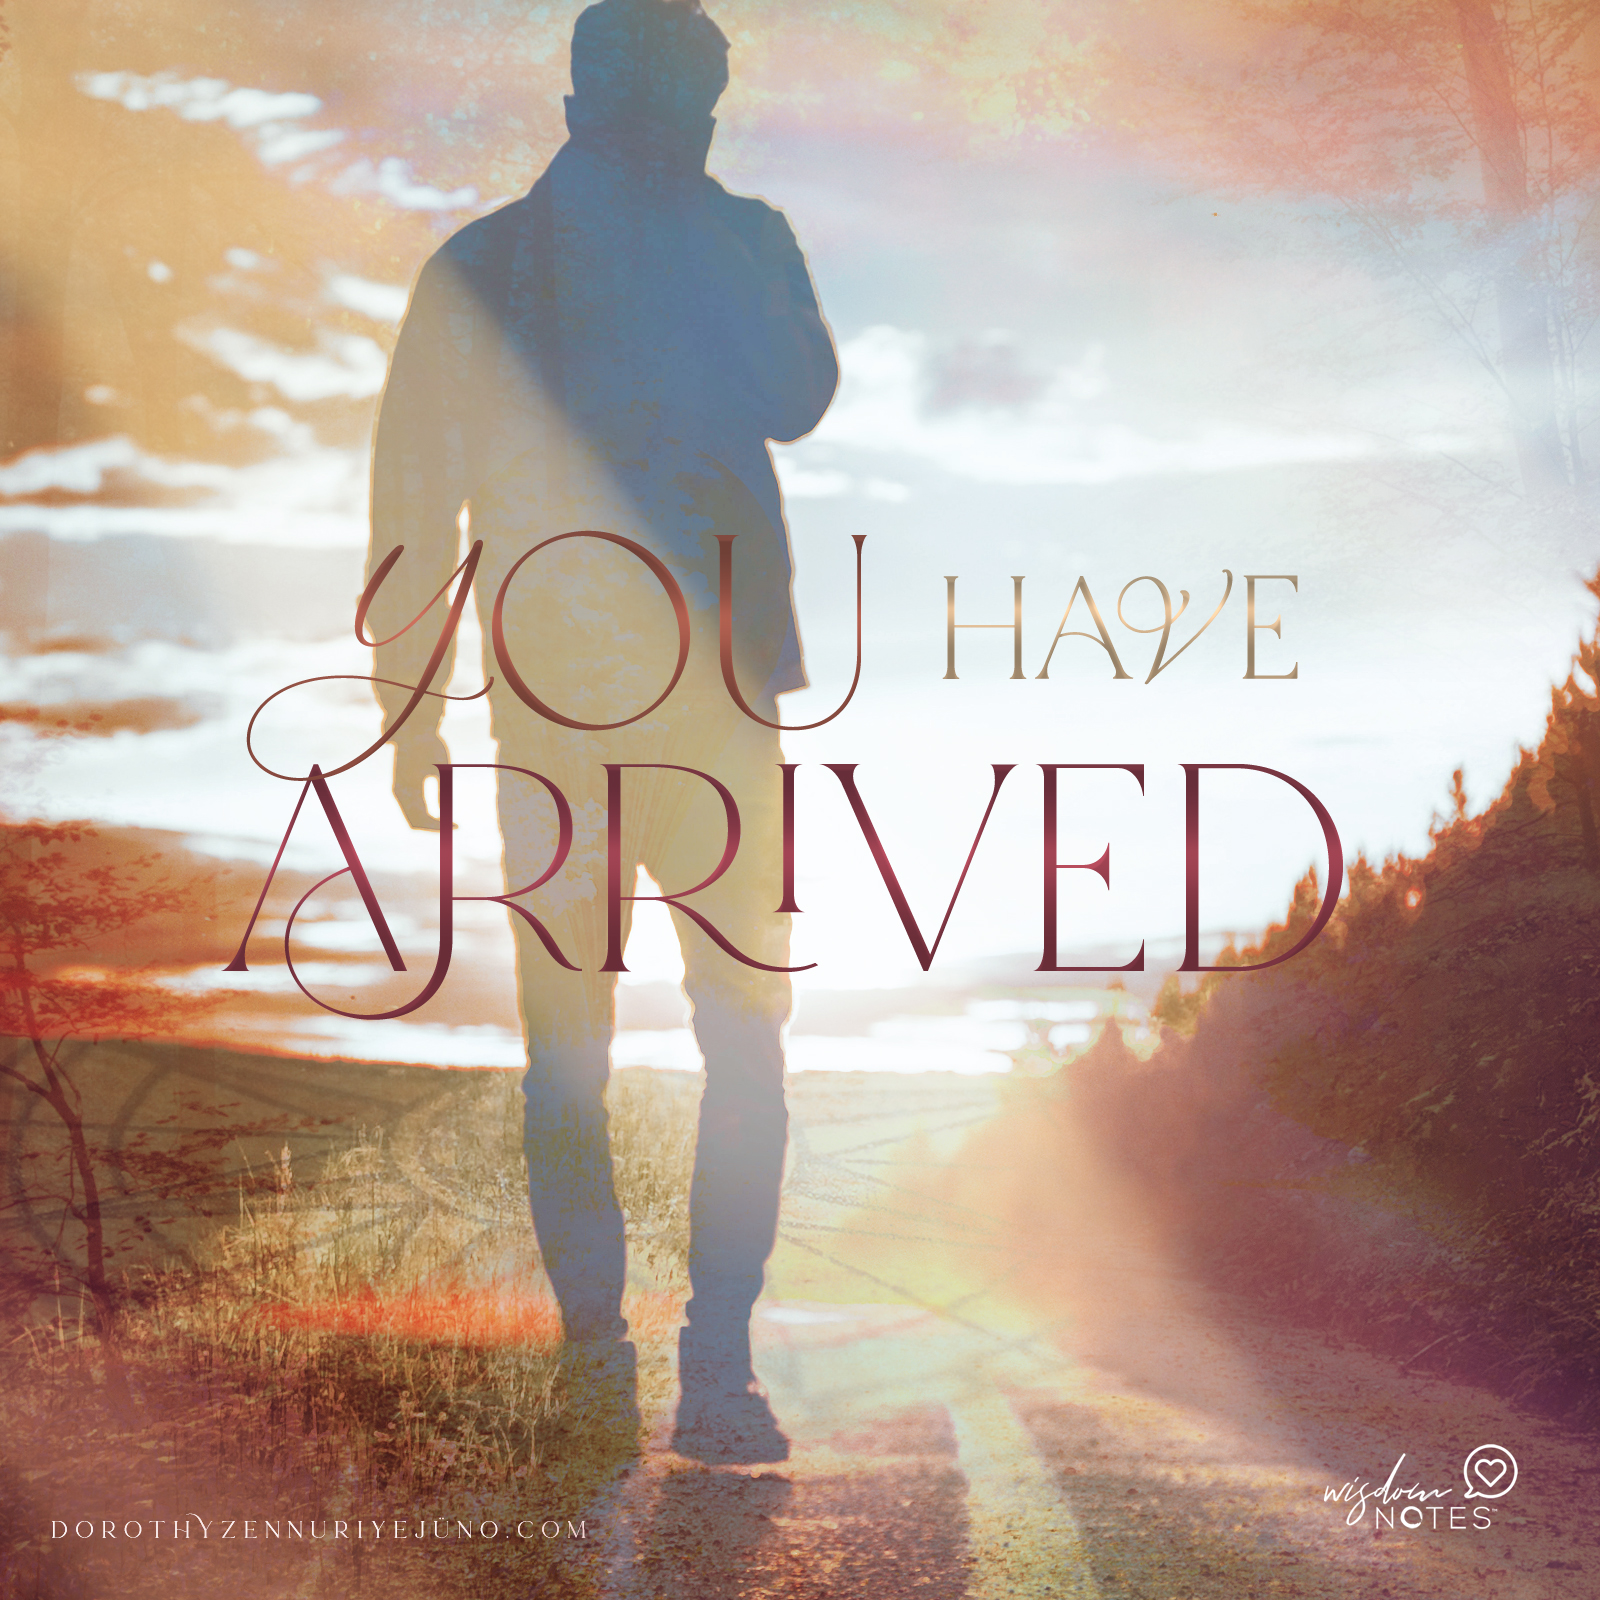 you have arrived - Wisdom Note 01.15.23 (man walking on road)